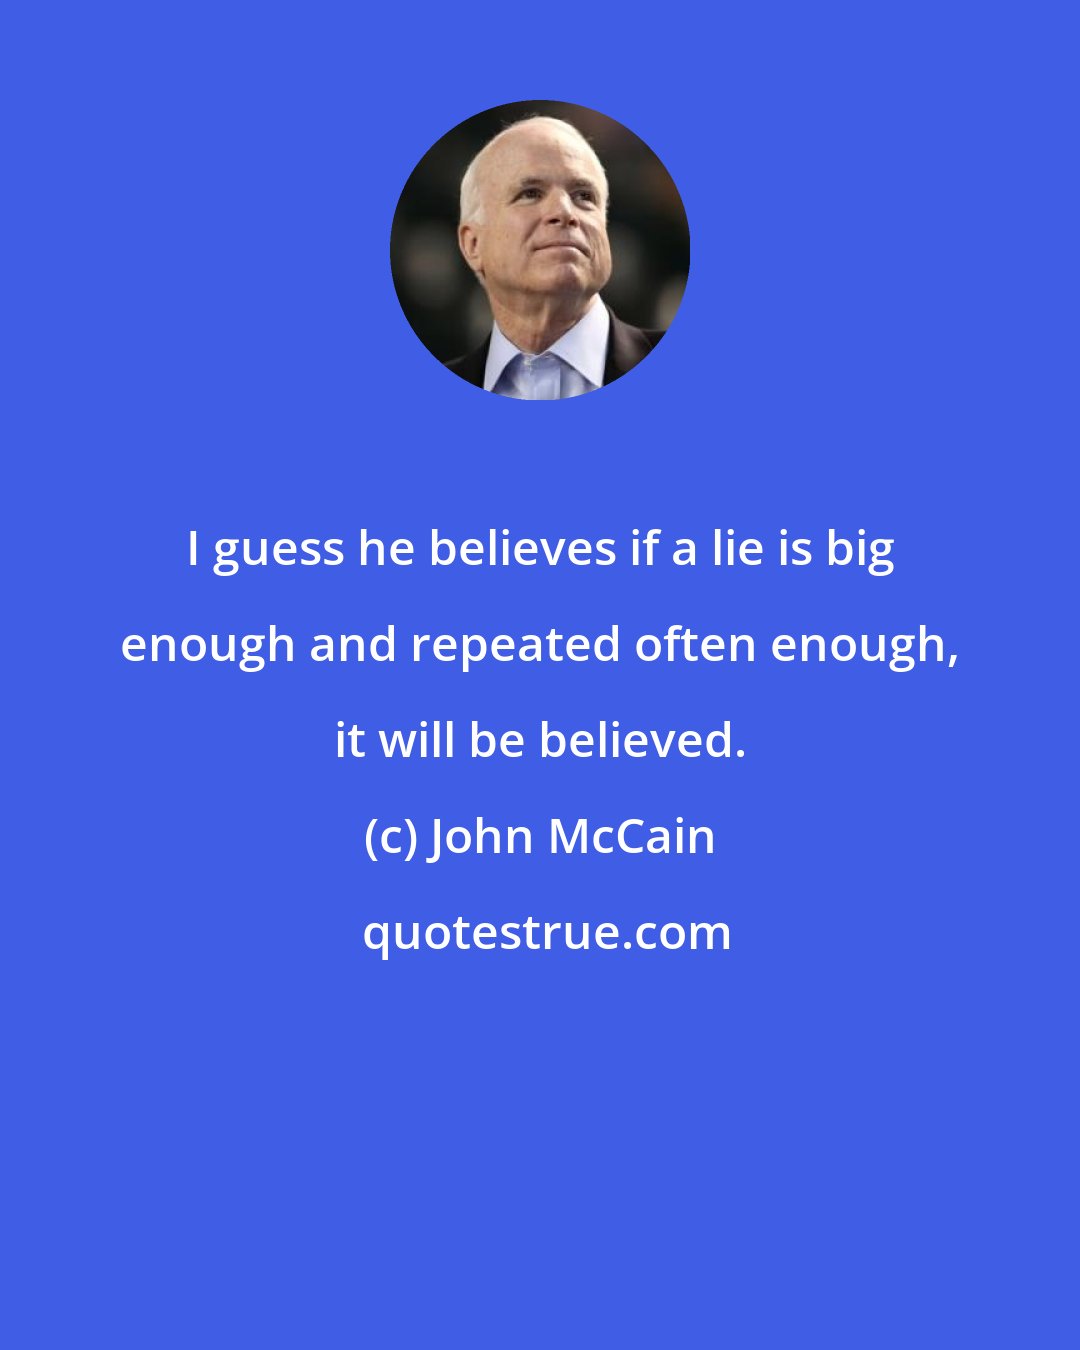 John McCain: I guess he believes if a lie is big enough and repeated often enough, it will be believed.